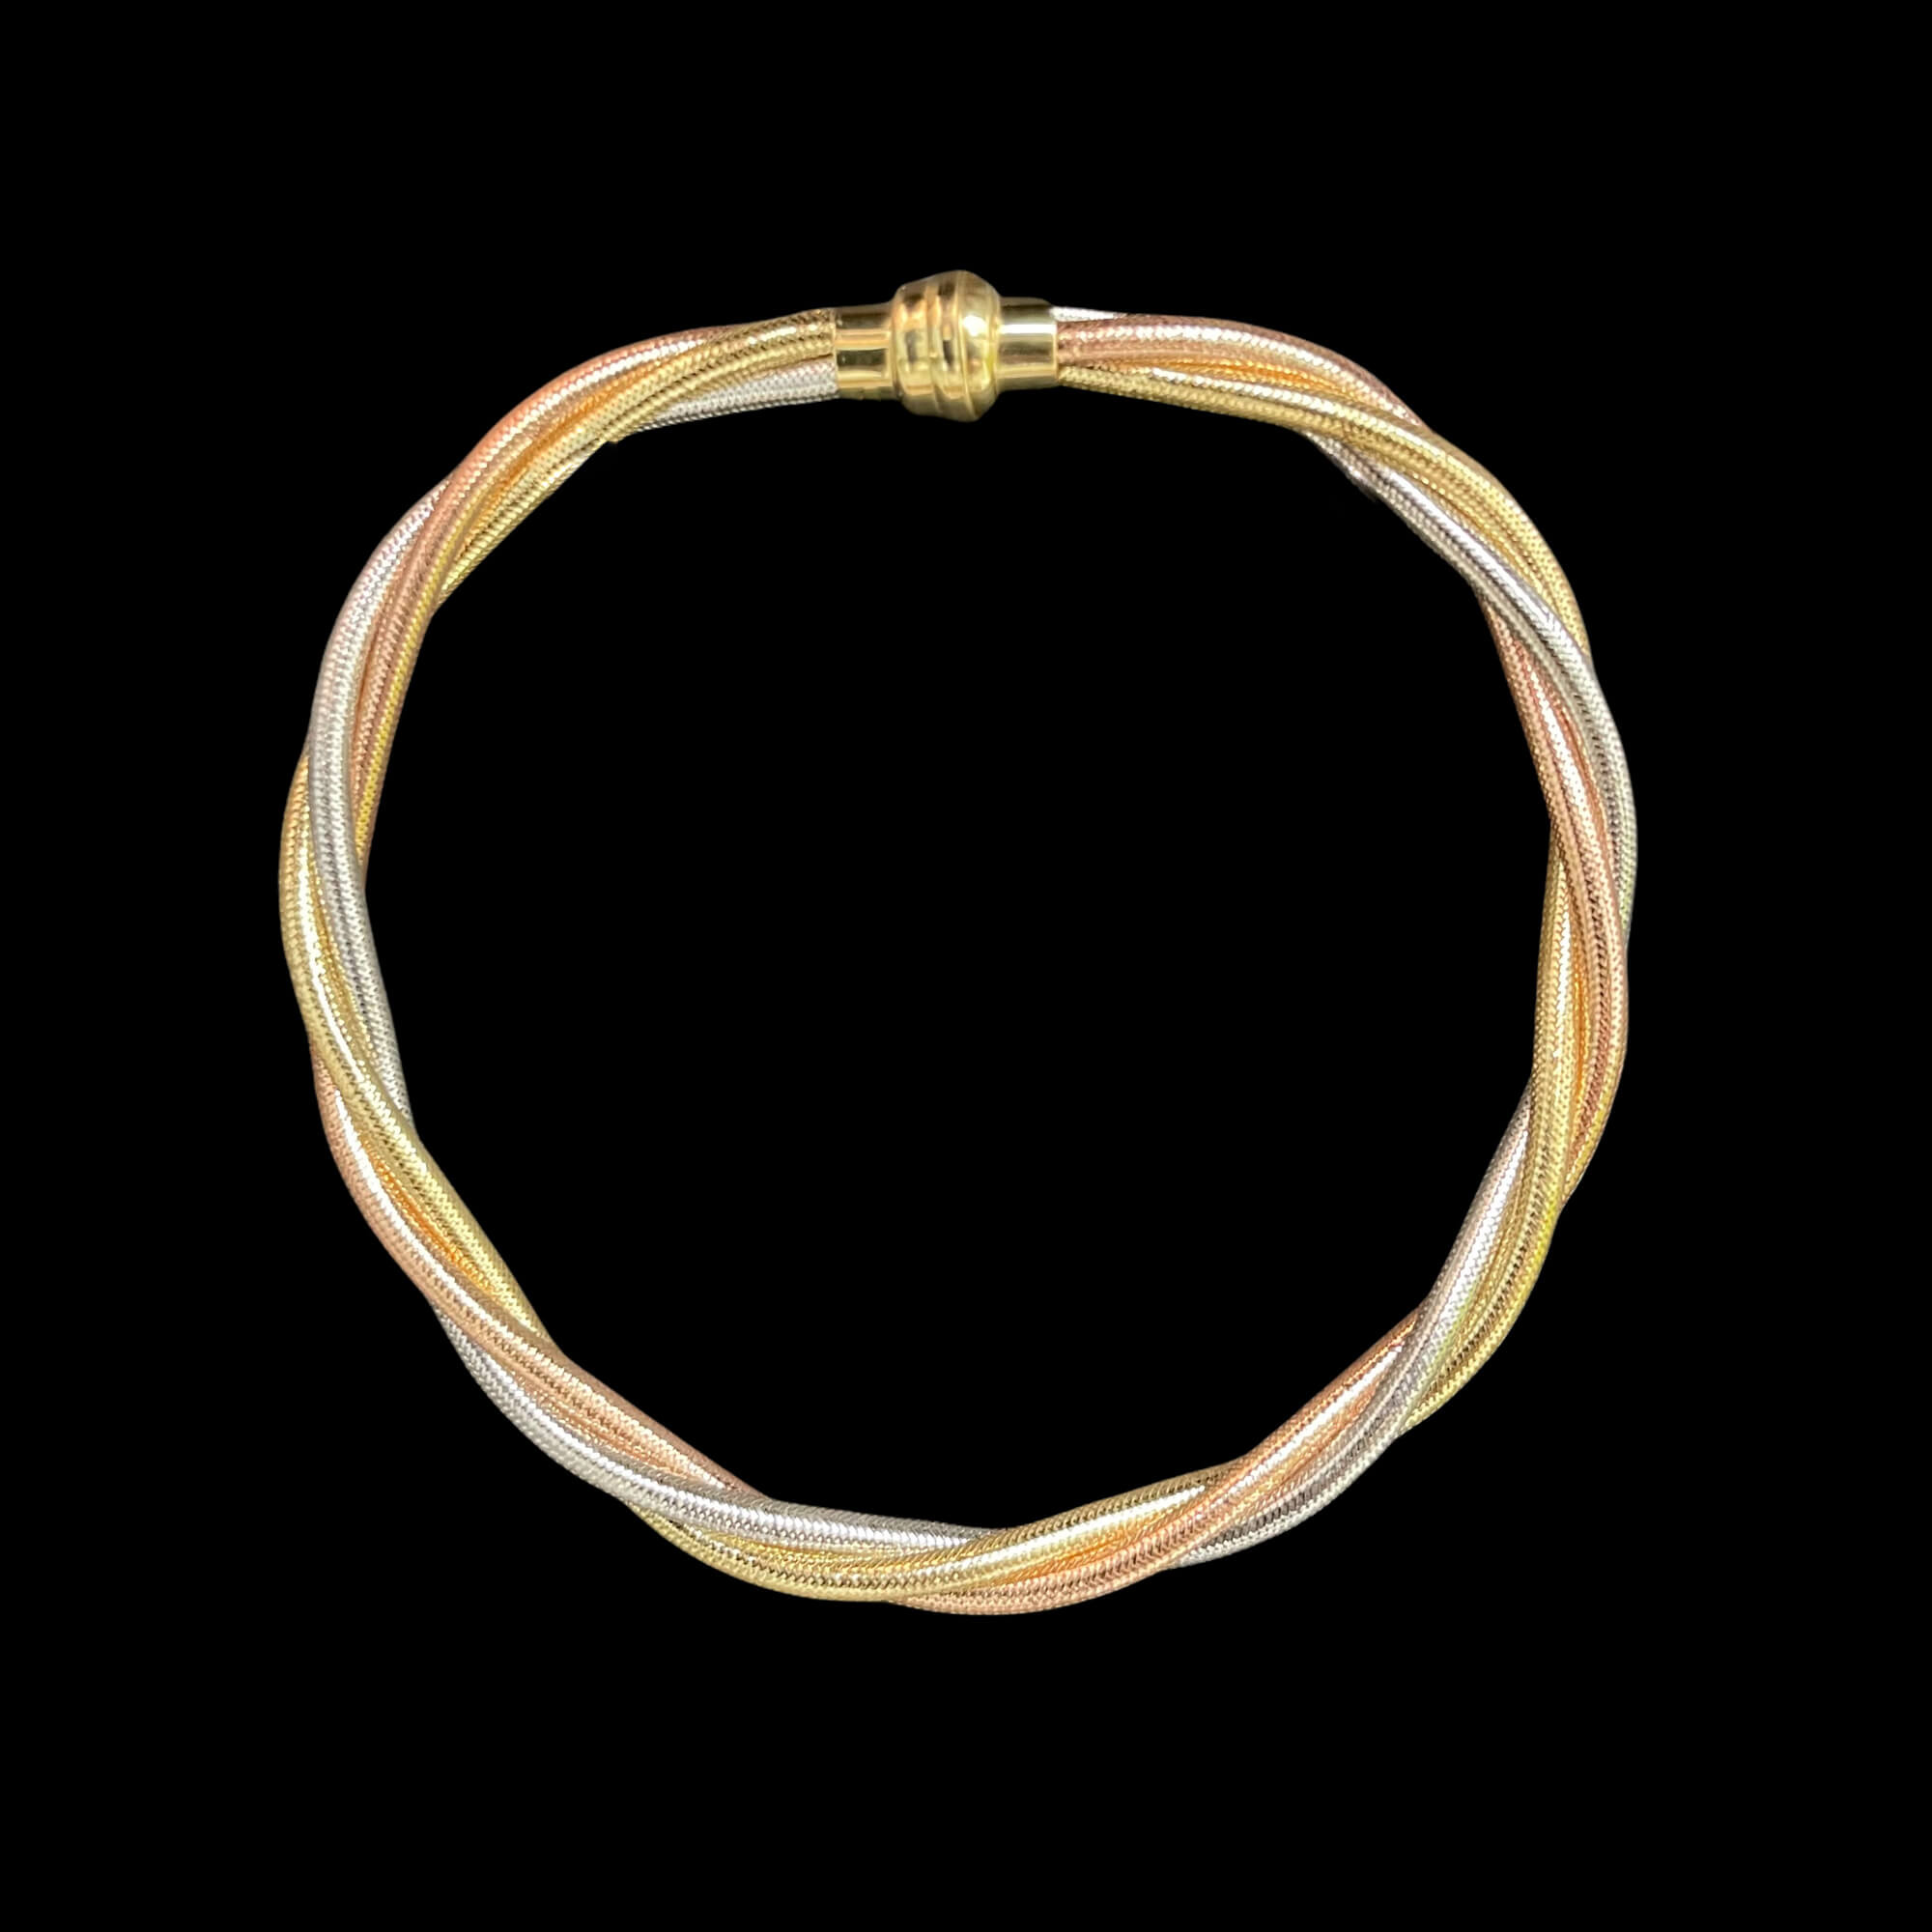 Twisted omega bracelet made of 3-color gold 18kt and silicone